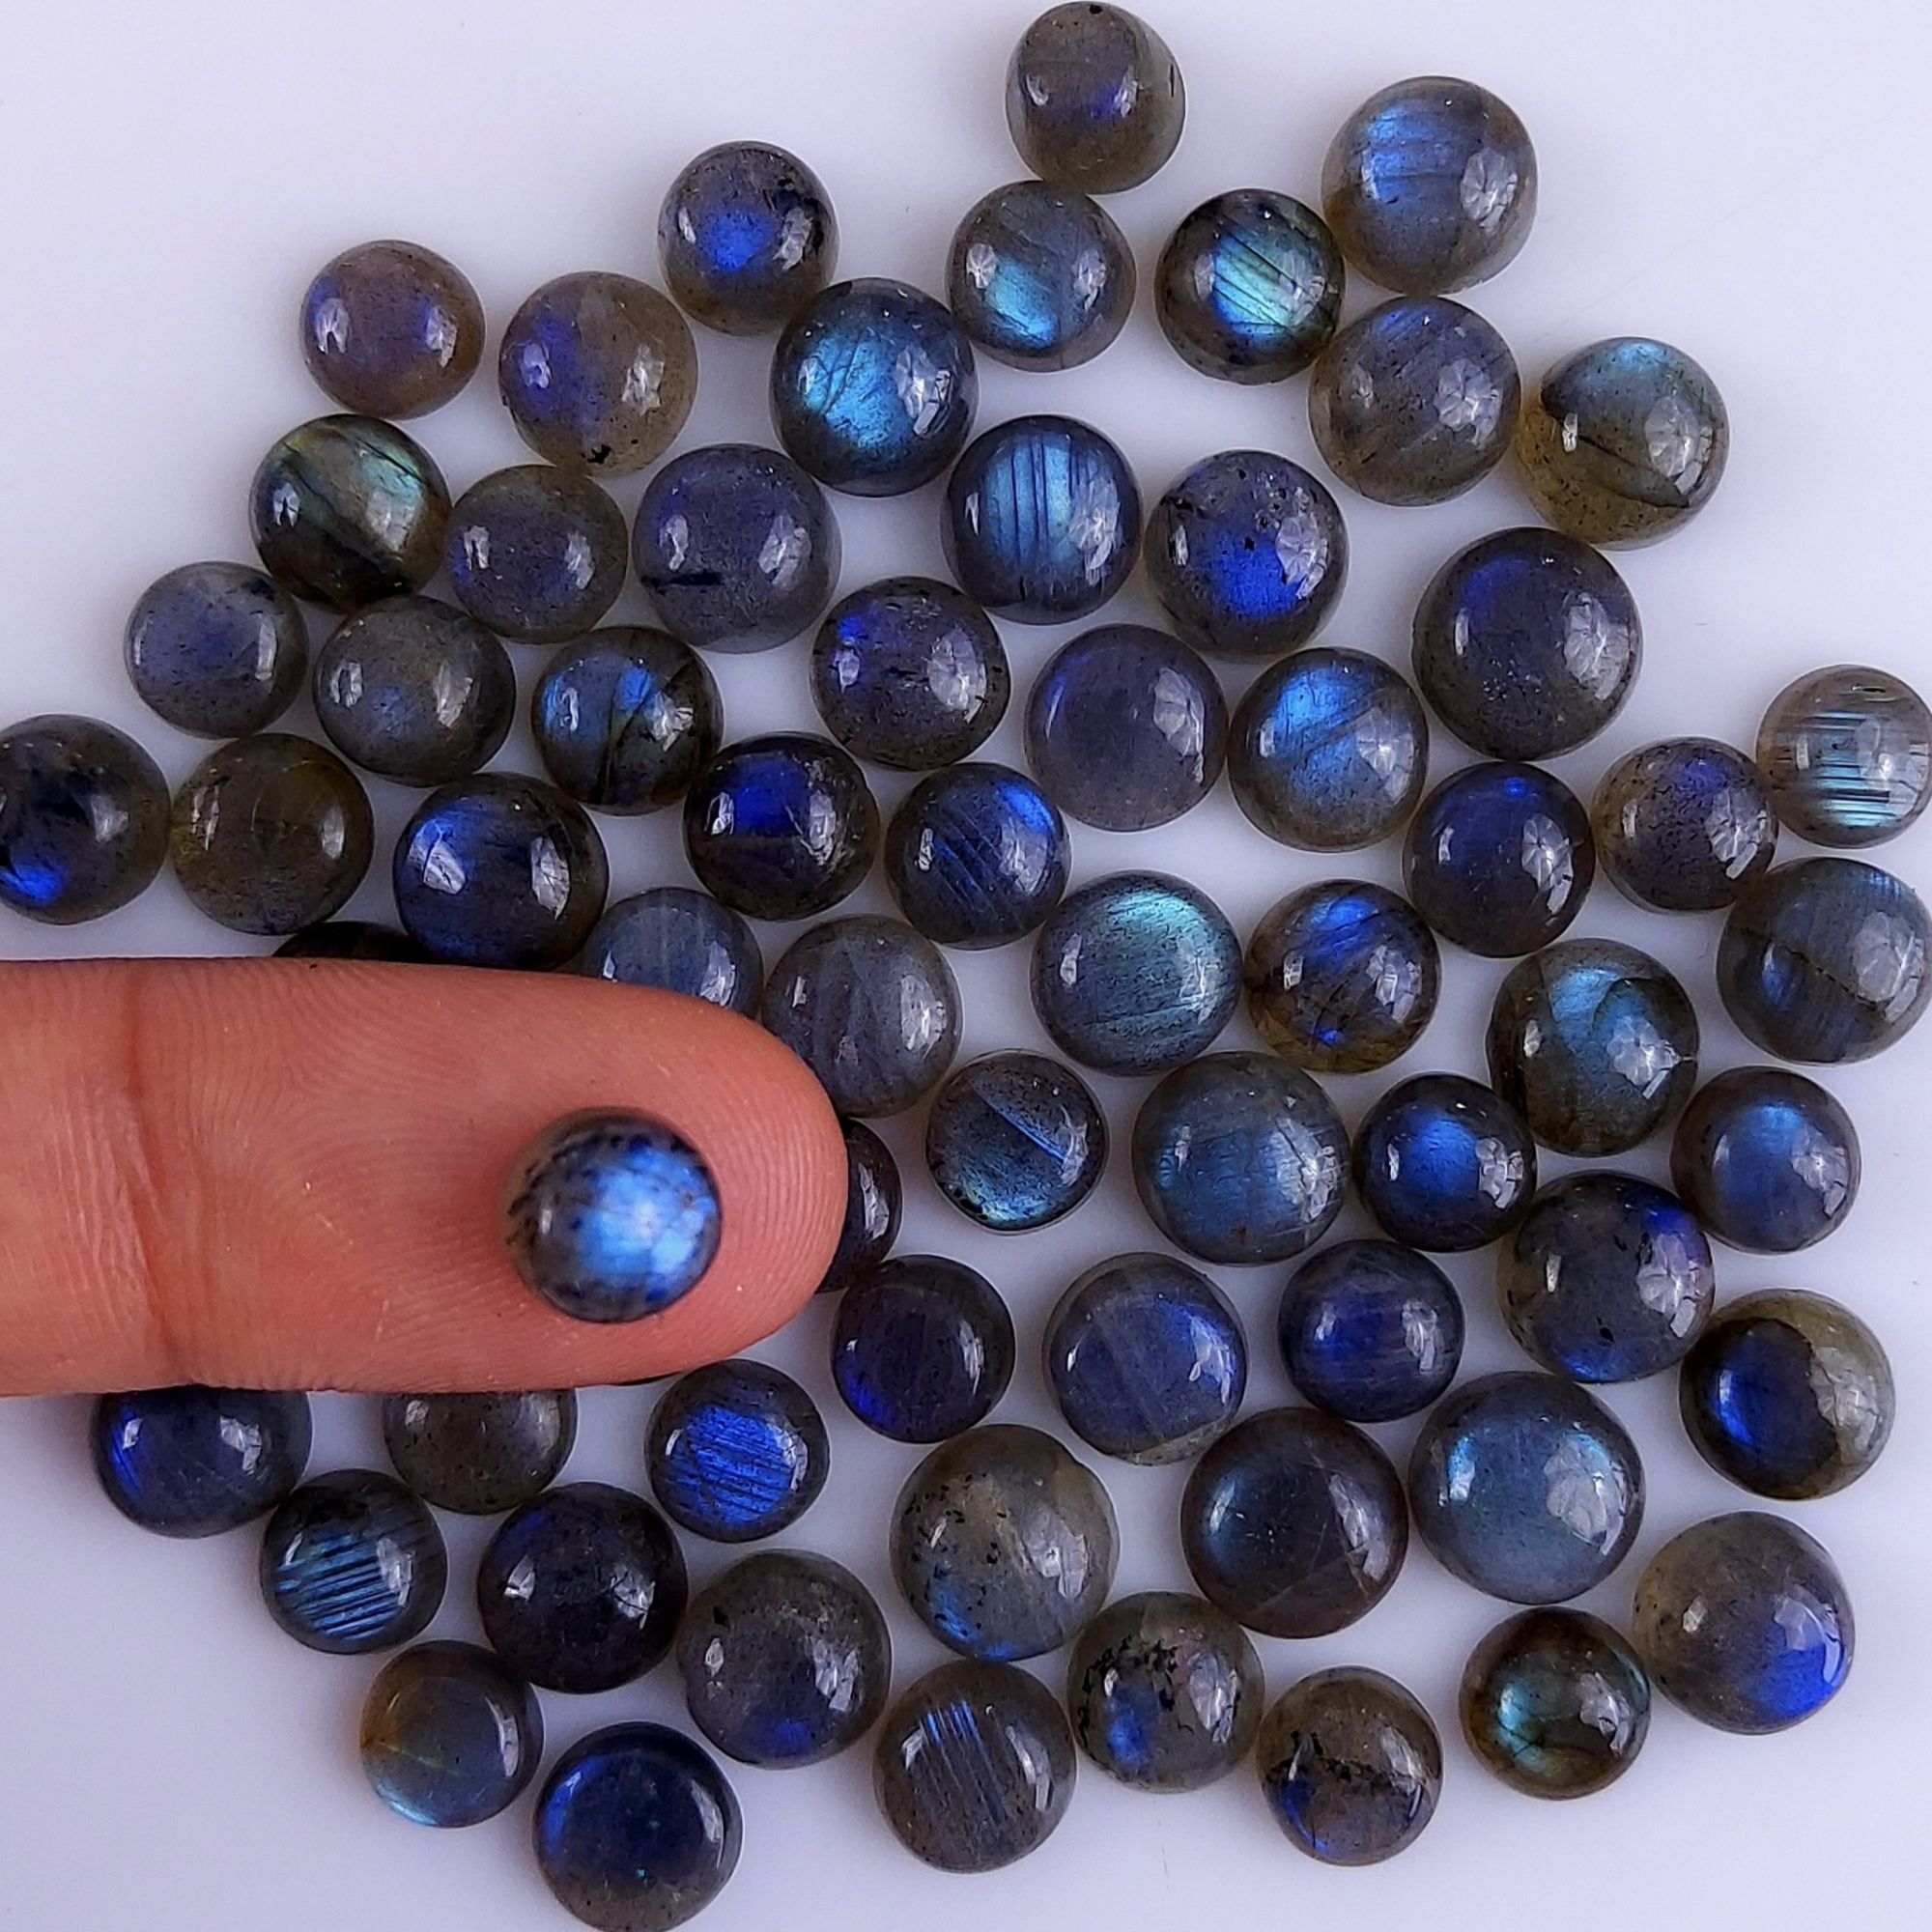 68Pcs 197Cts Natural Blue Labradorite Calibrated Cabochon Round Shape Gemstone Lot For Jewelry Making 5x5mm#756